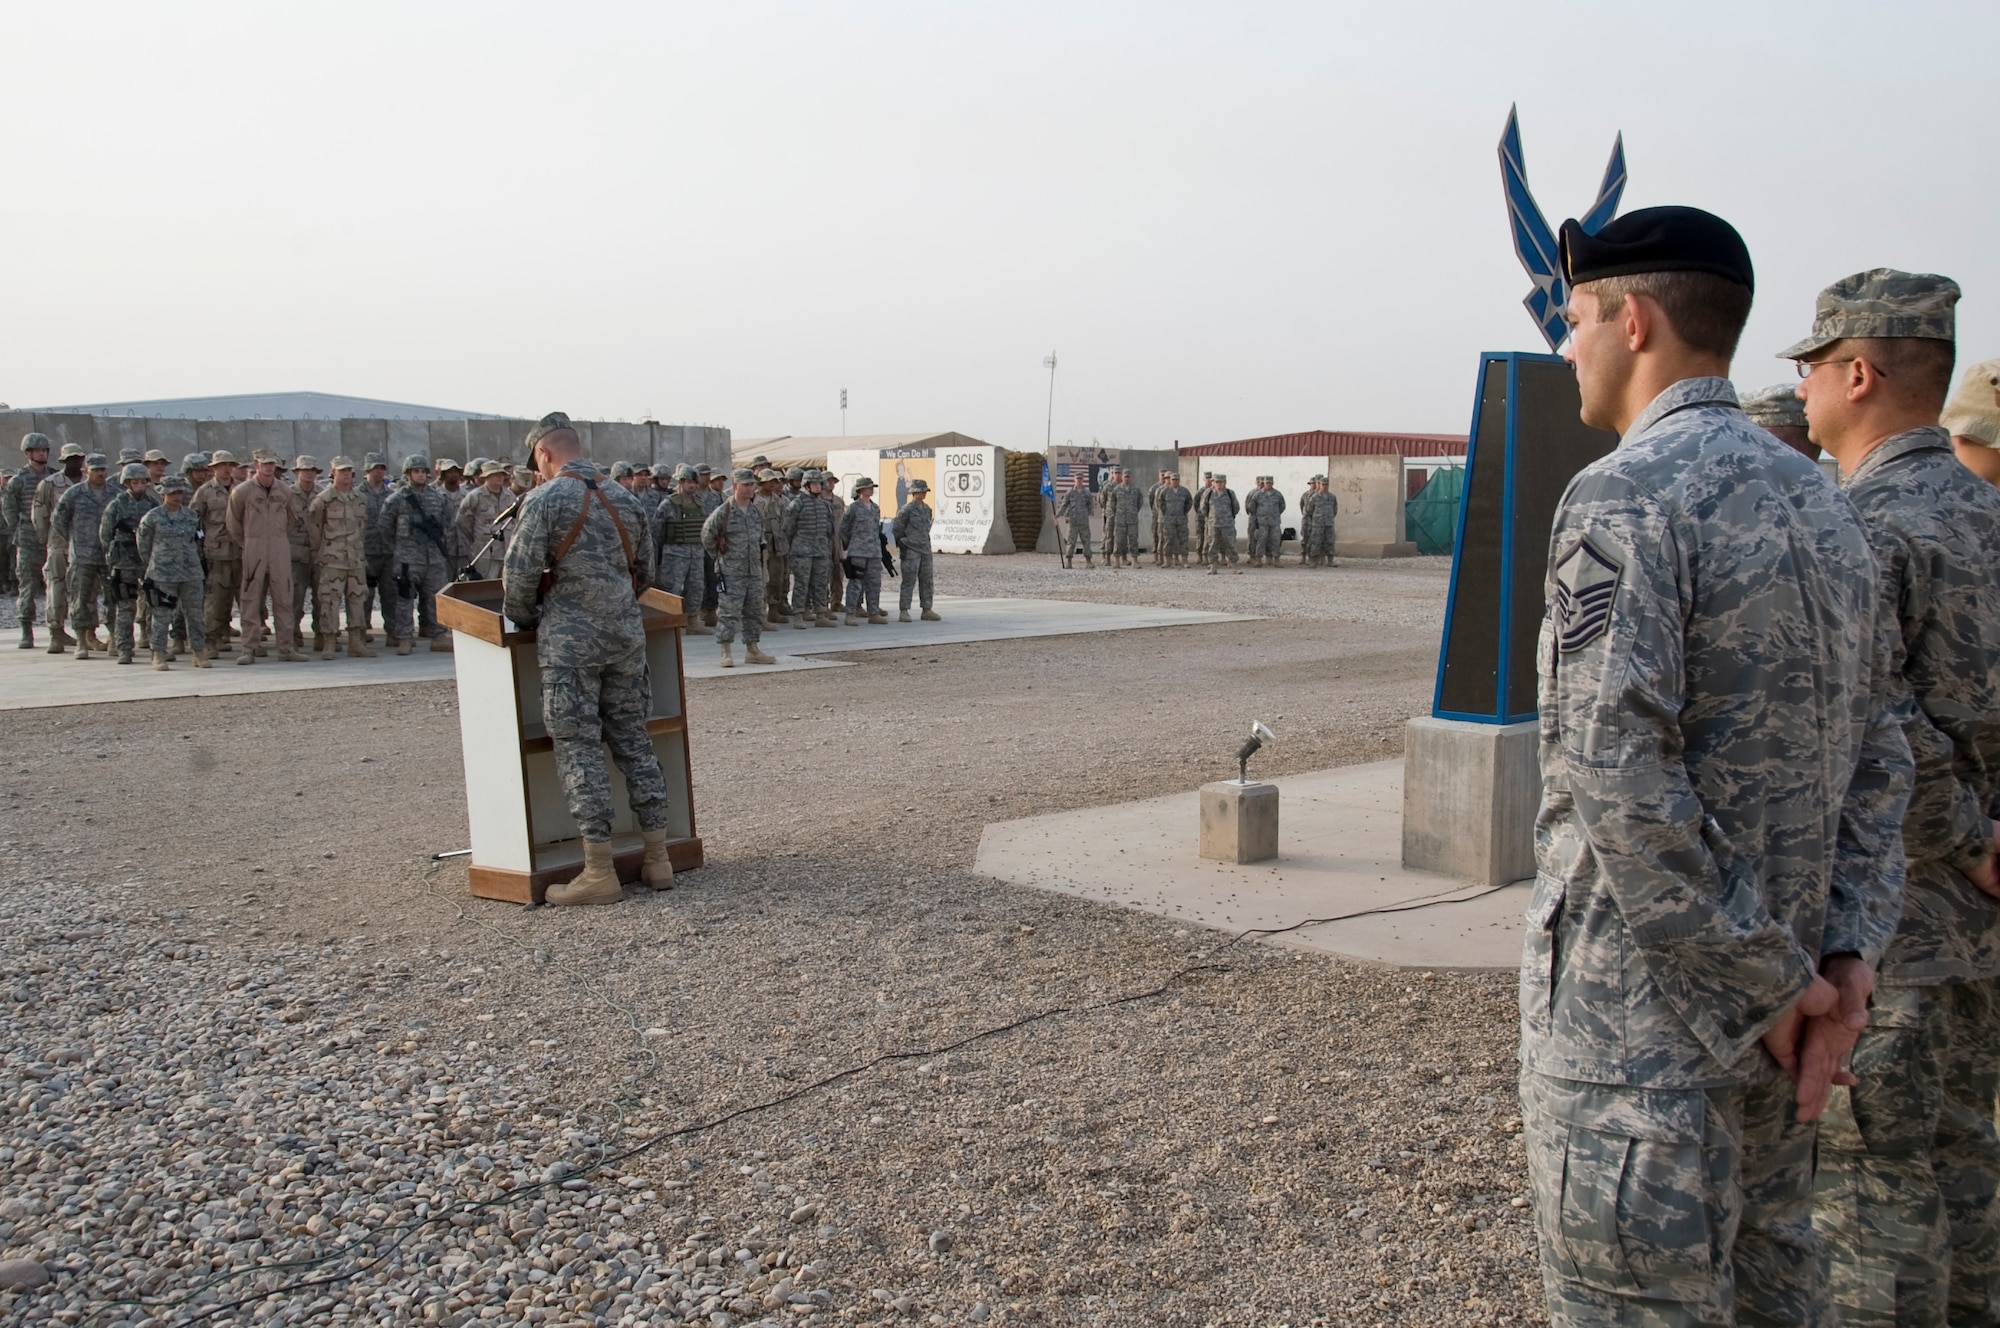 ALI BASE, Iraq -- Members of the 407 Air Expeditionary Group held a remembrance ceremony here Sept. 11, 2008, following reveille, honoring those who had lost their lives back on this day in 2001. (U.S. Air Force photo/Airman 1st Class Christopher Griffin)